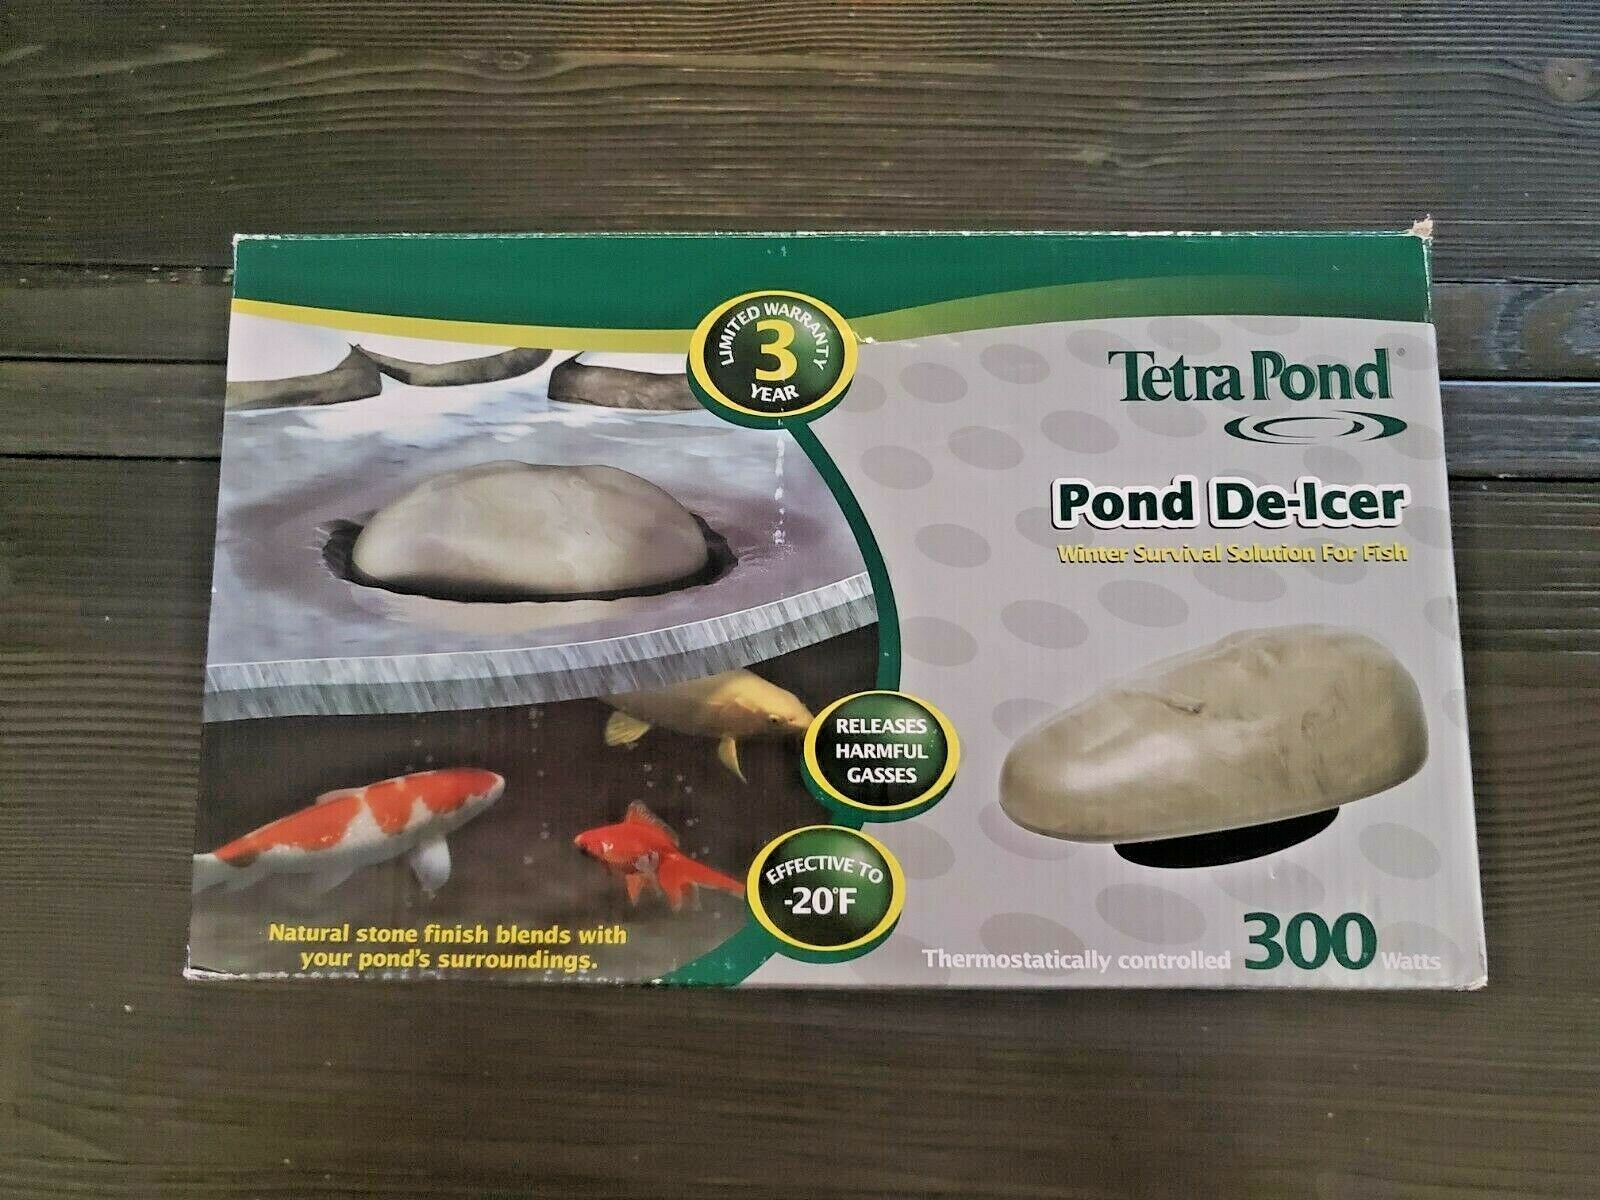 Tetrapond De-icer, Thermostatically Controlled Winter Survival Solution For Fish